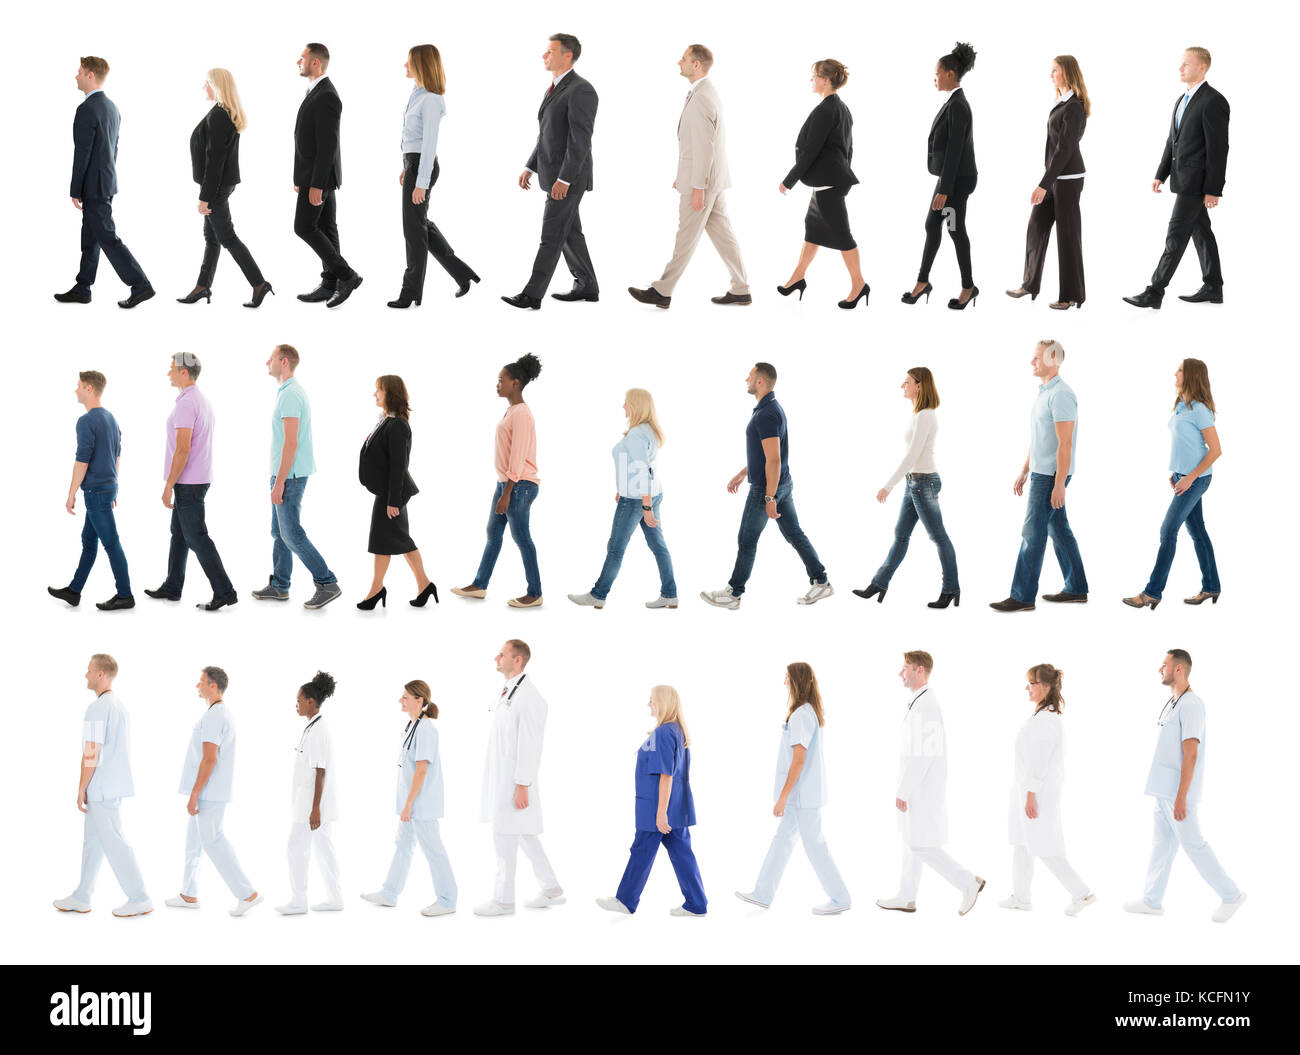 Collage Of People From Different Occupations Walking In Line Against White Background Stock Photo